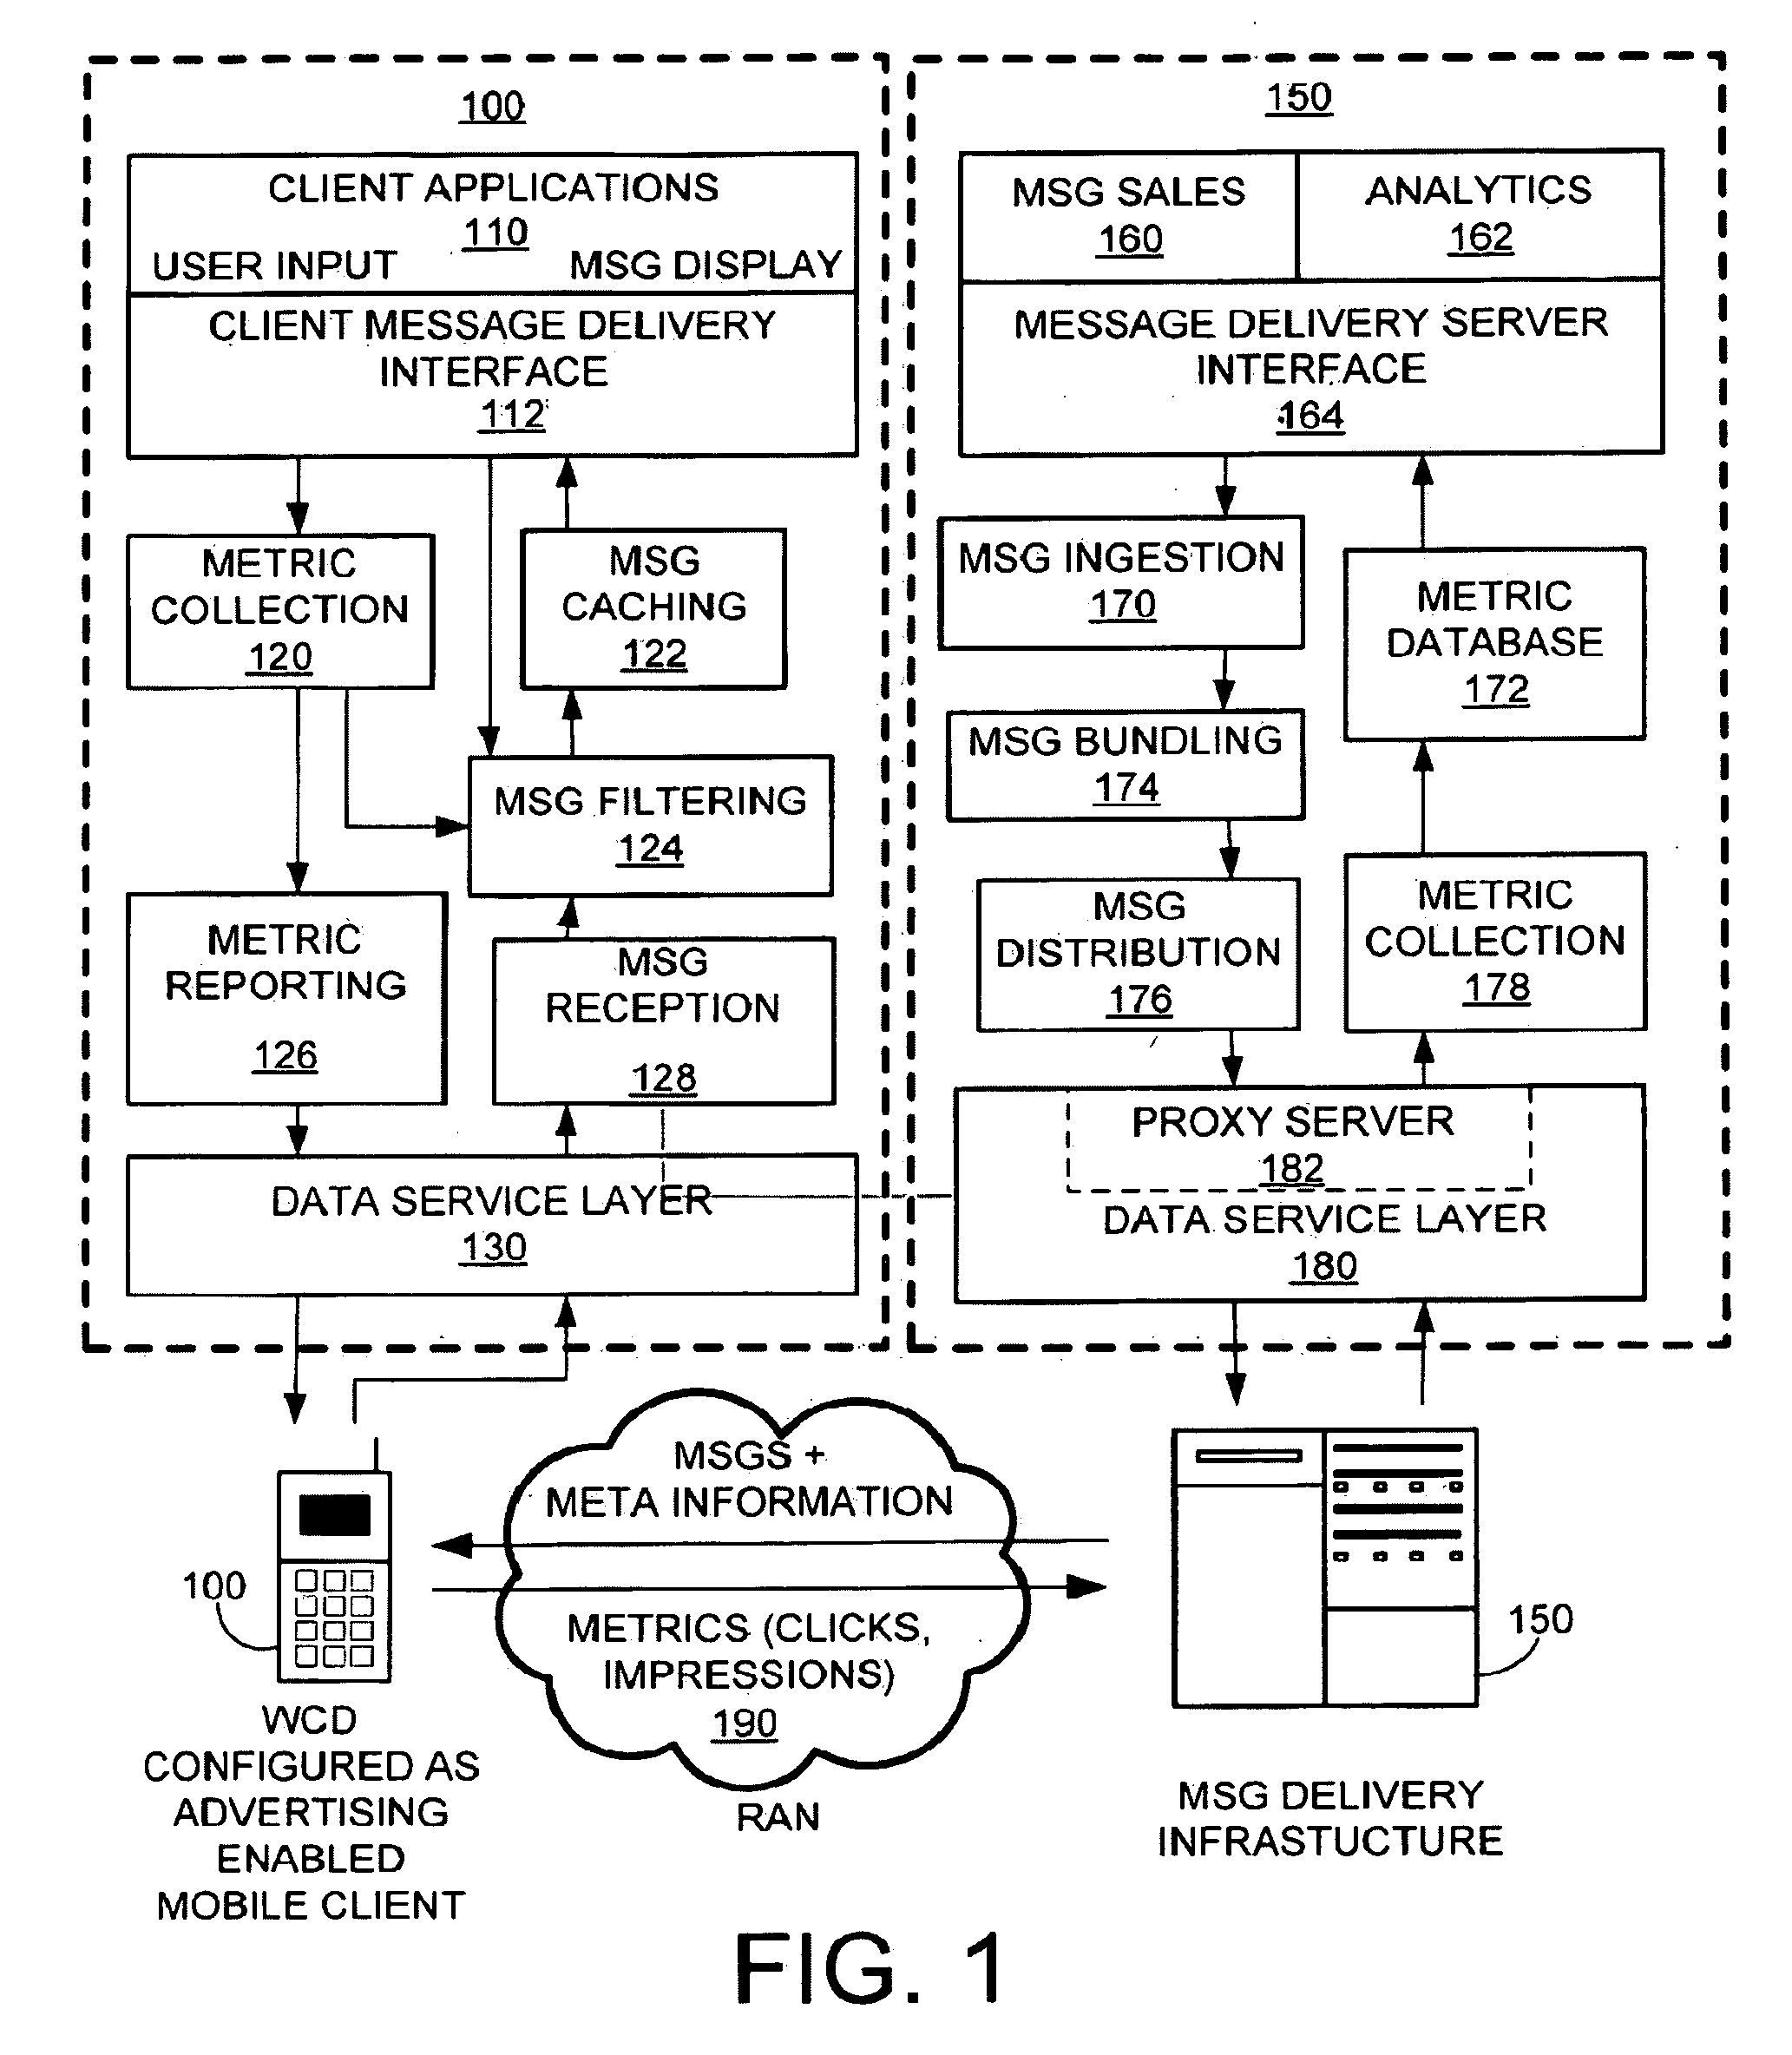 Methods and systems for determining a geographic user profile to determine suitability of targeted content messages based on the profile